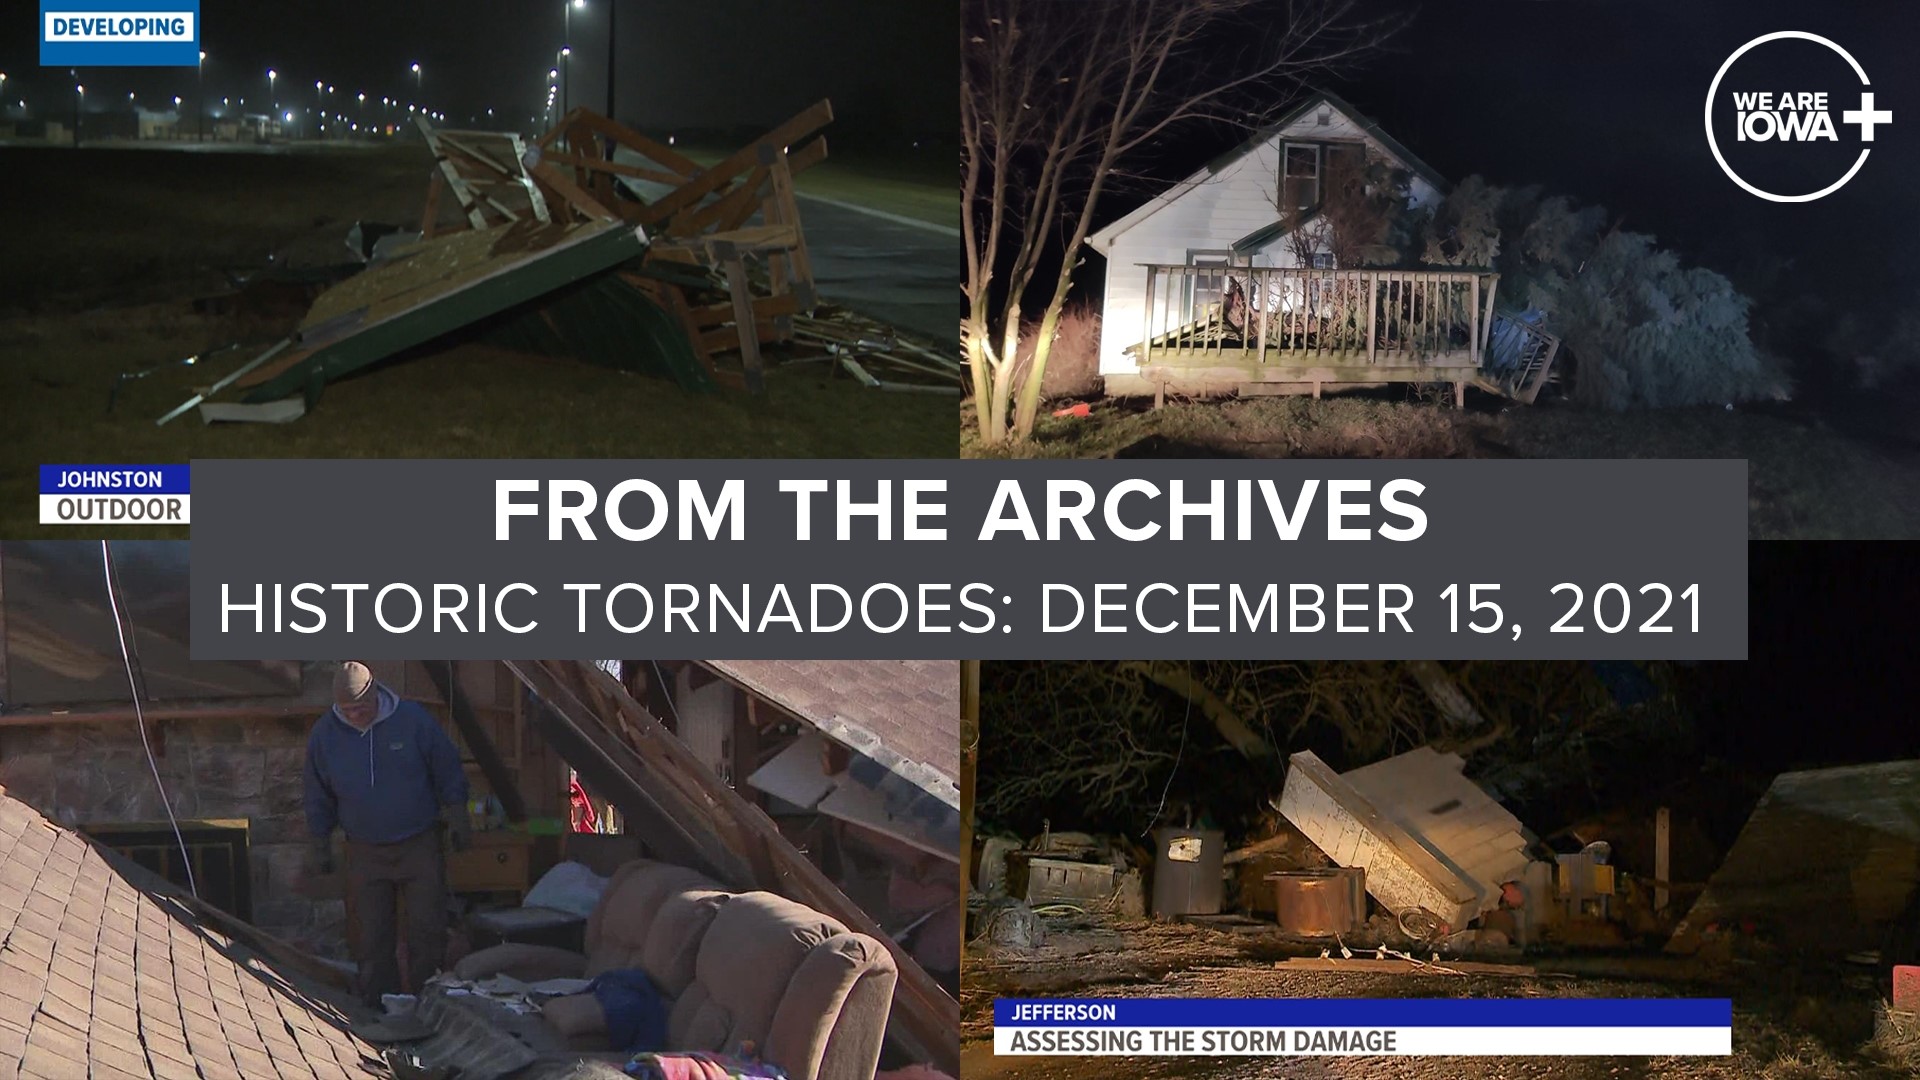 Over five dozen tornadoes touched down in Iowa on Dec. 15, 2021 according to the National Weather Service.